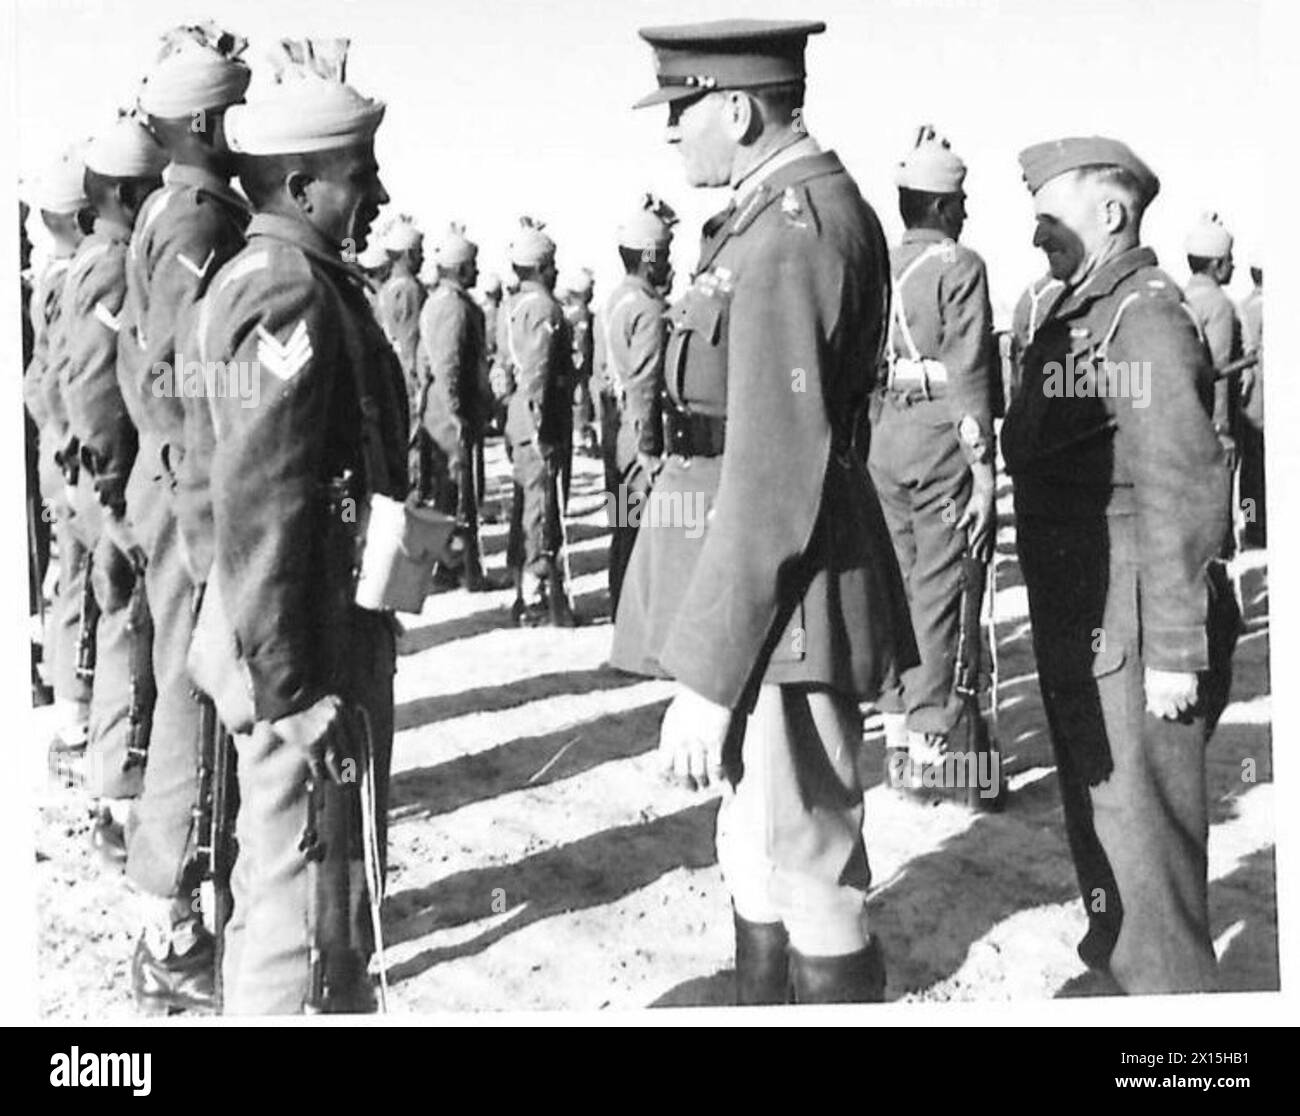 C-IN-C's TOUR OF 10TH ARMY - The C-in-C inspecting men of the 6th Div.H.Q British Army Stock Photo